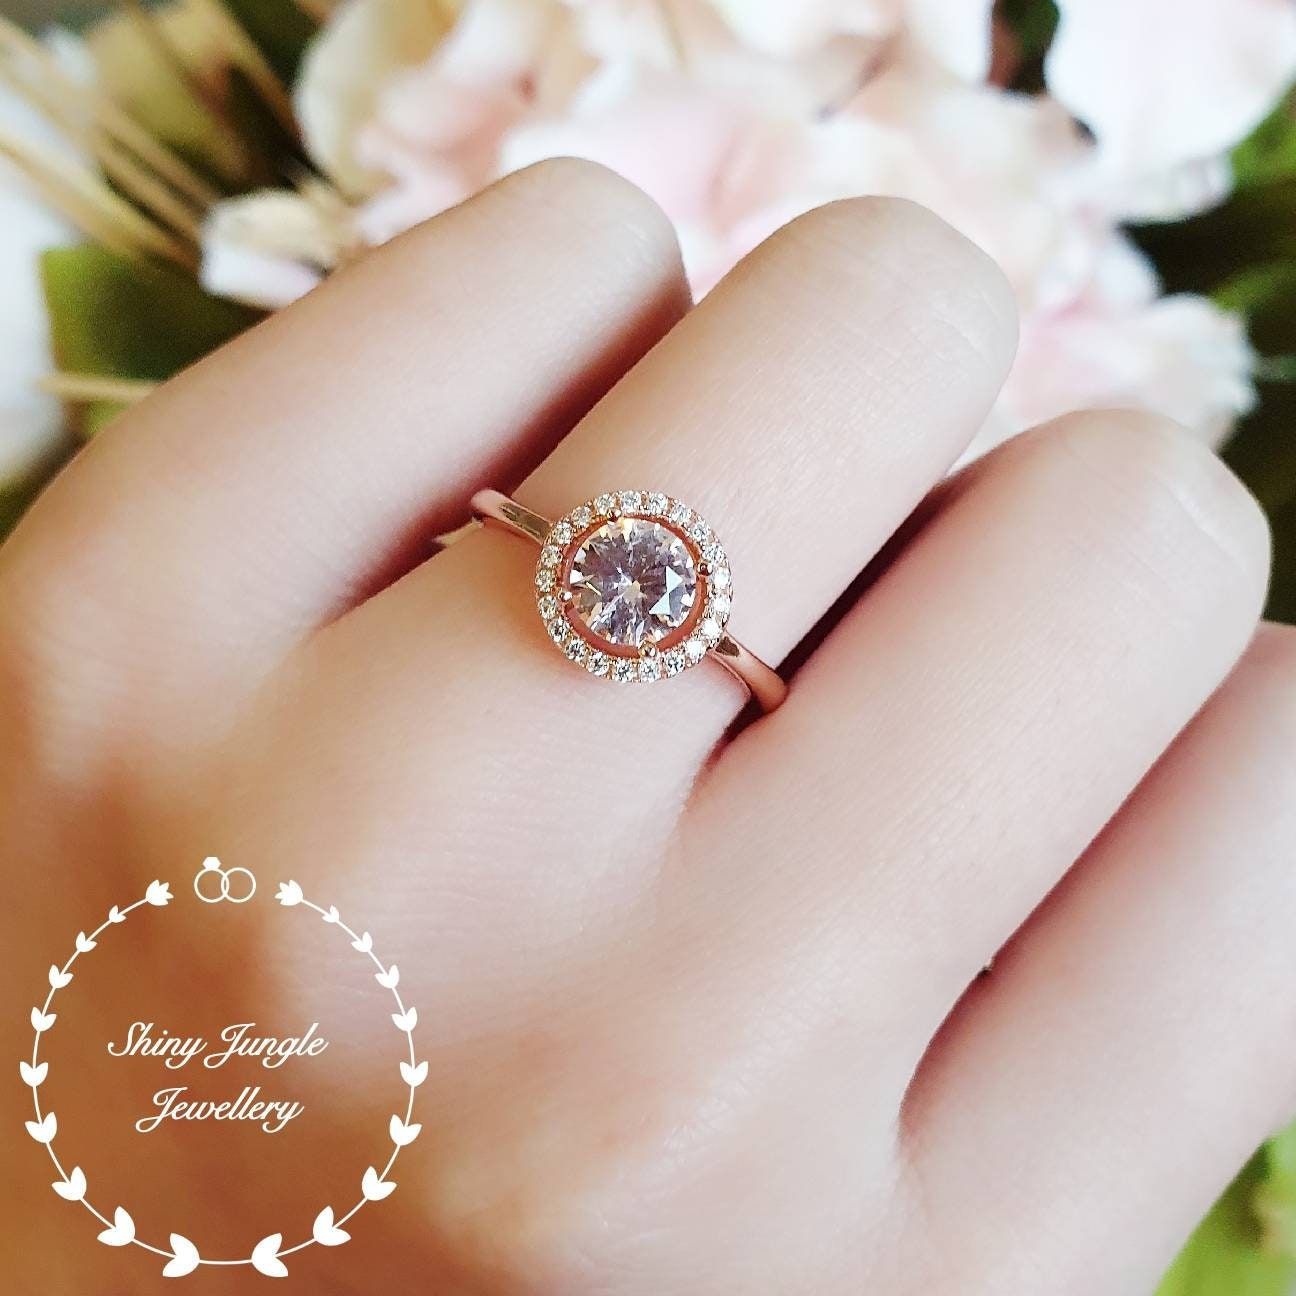 Classic 1 Carat Round Morganite Halo Engagement Ring, Brilliant Cut Morganite  Promise Ring, White/rose Gold Plated Sterling Silver Pertaining To Morganite Halo Promise Rings (View 14 of 25)